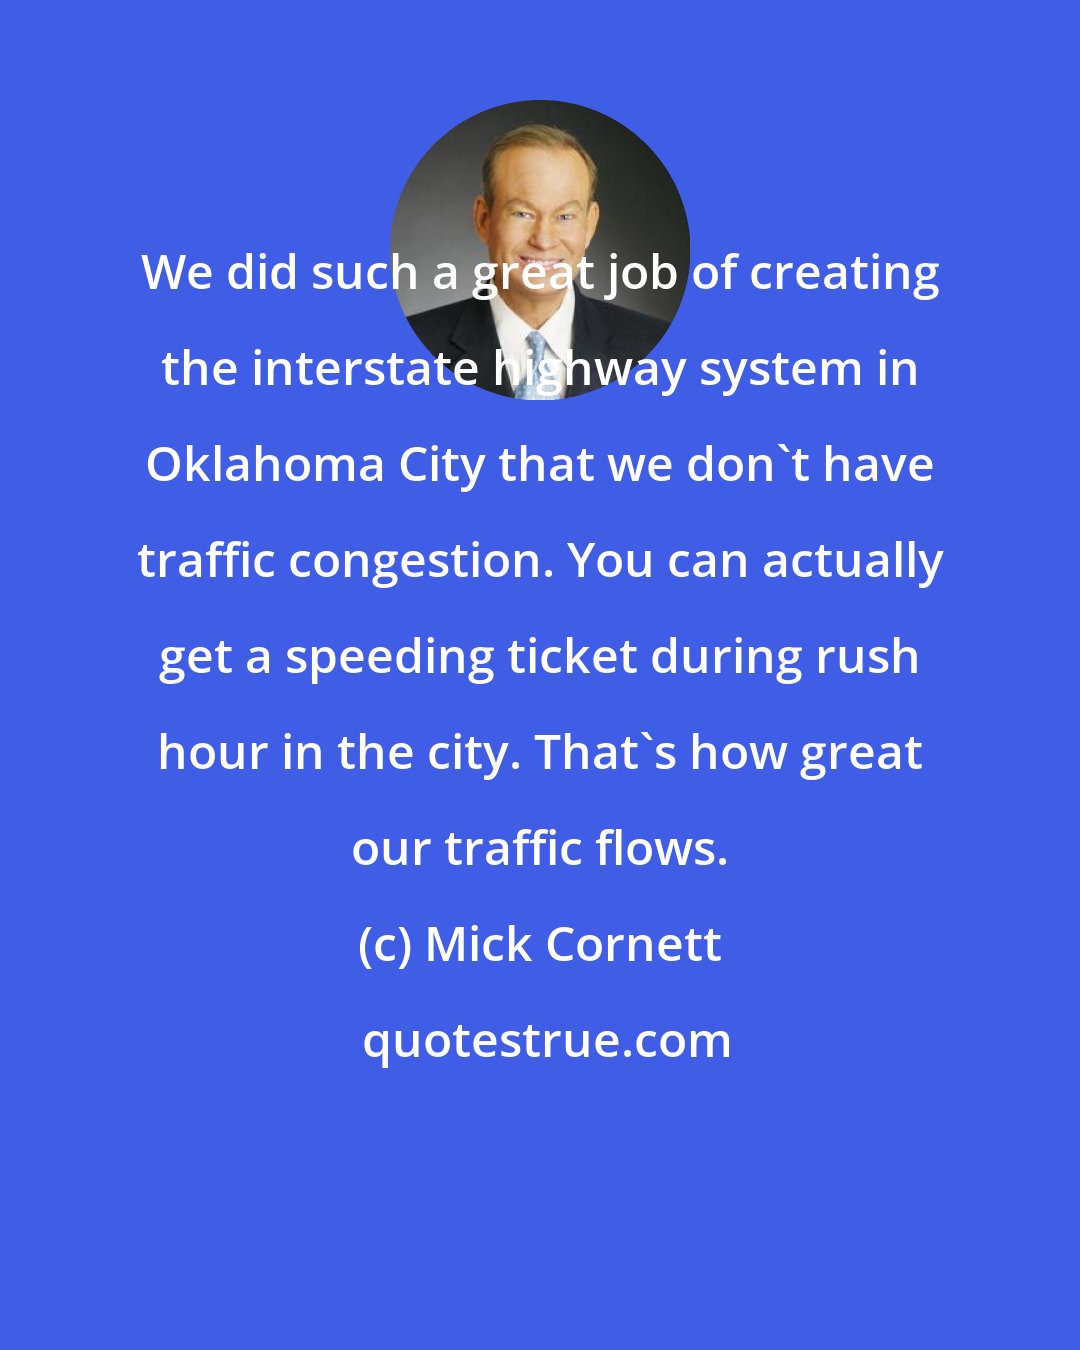 Mick Cornett: We did such a great job of creating the interstate highway system in Oklahoma City that we don't have traffic congestion. You can actually get a speeding ticket during rush hour in the city. That's how great our traffic flows.